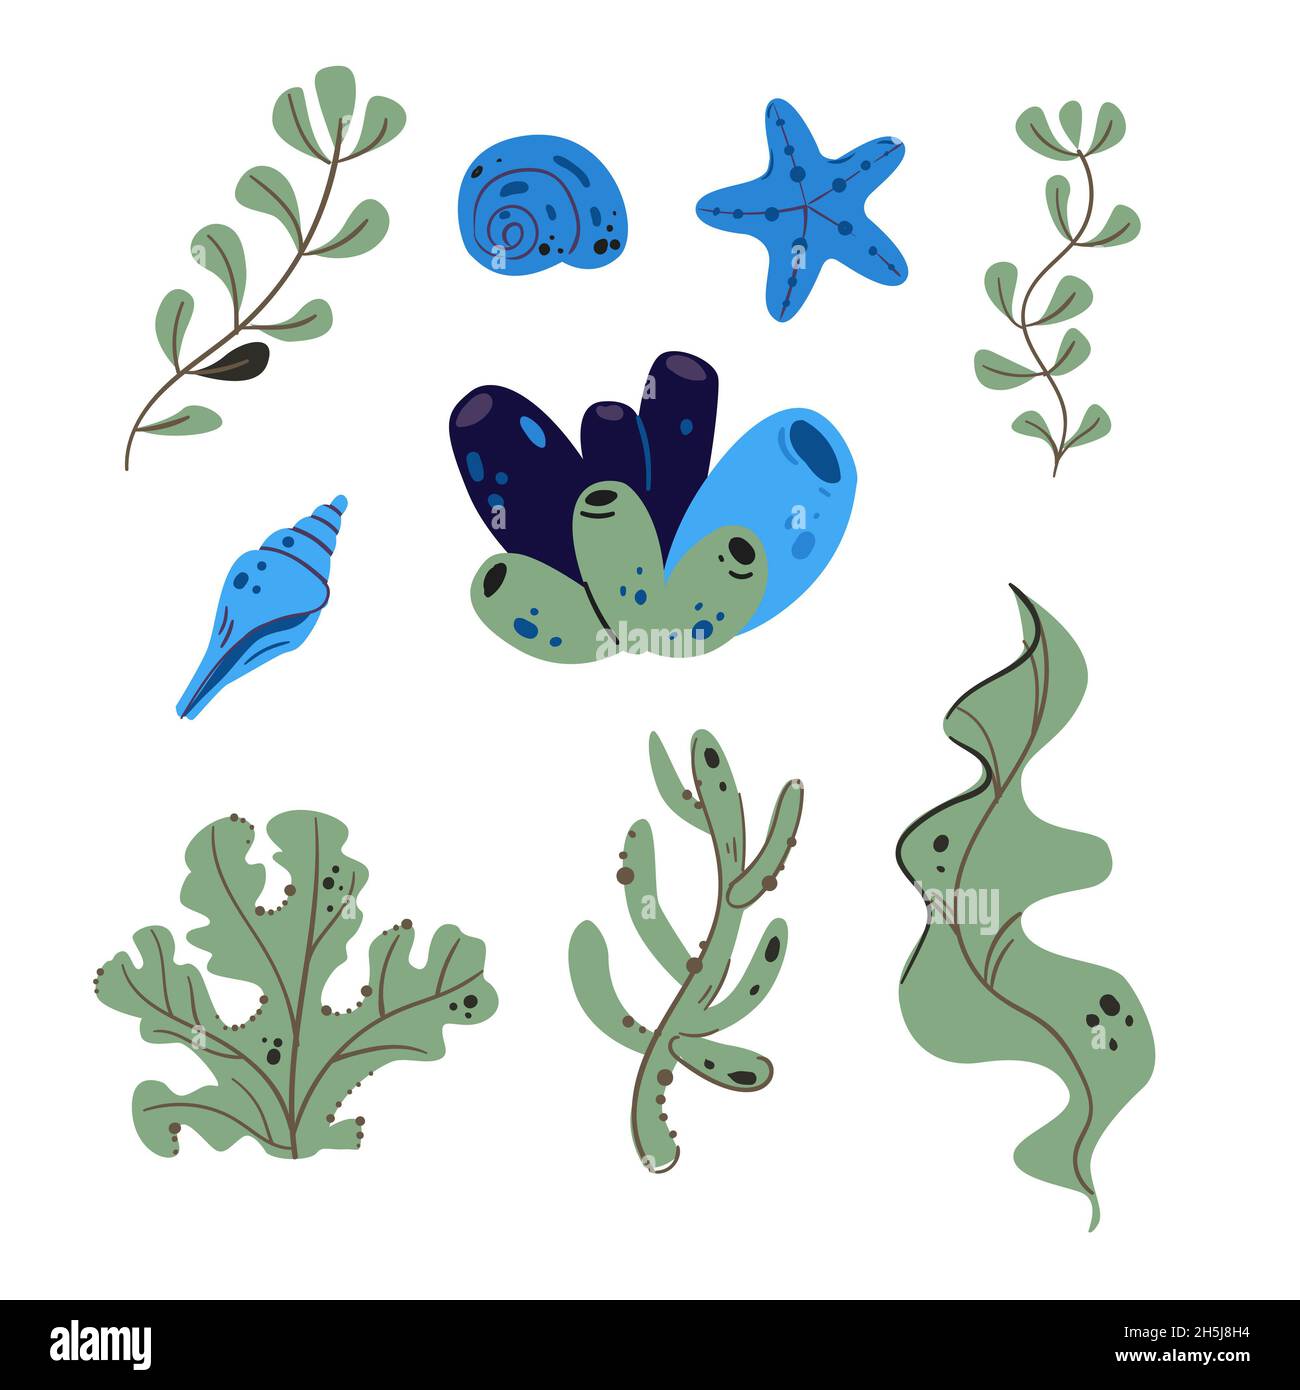 Algae vector Cut Out Stock Images & Pictures - Page 3 - Alamy